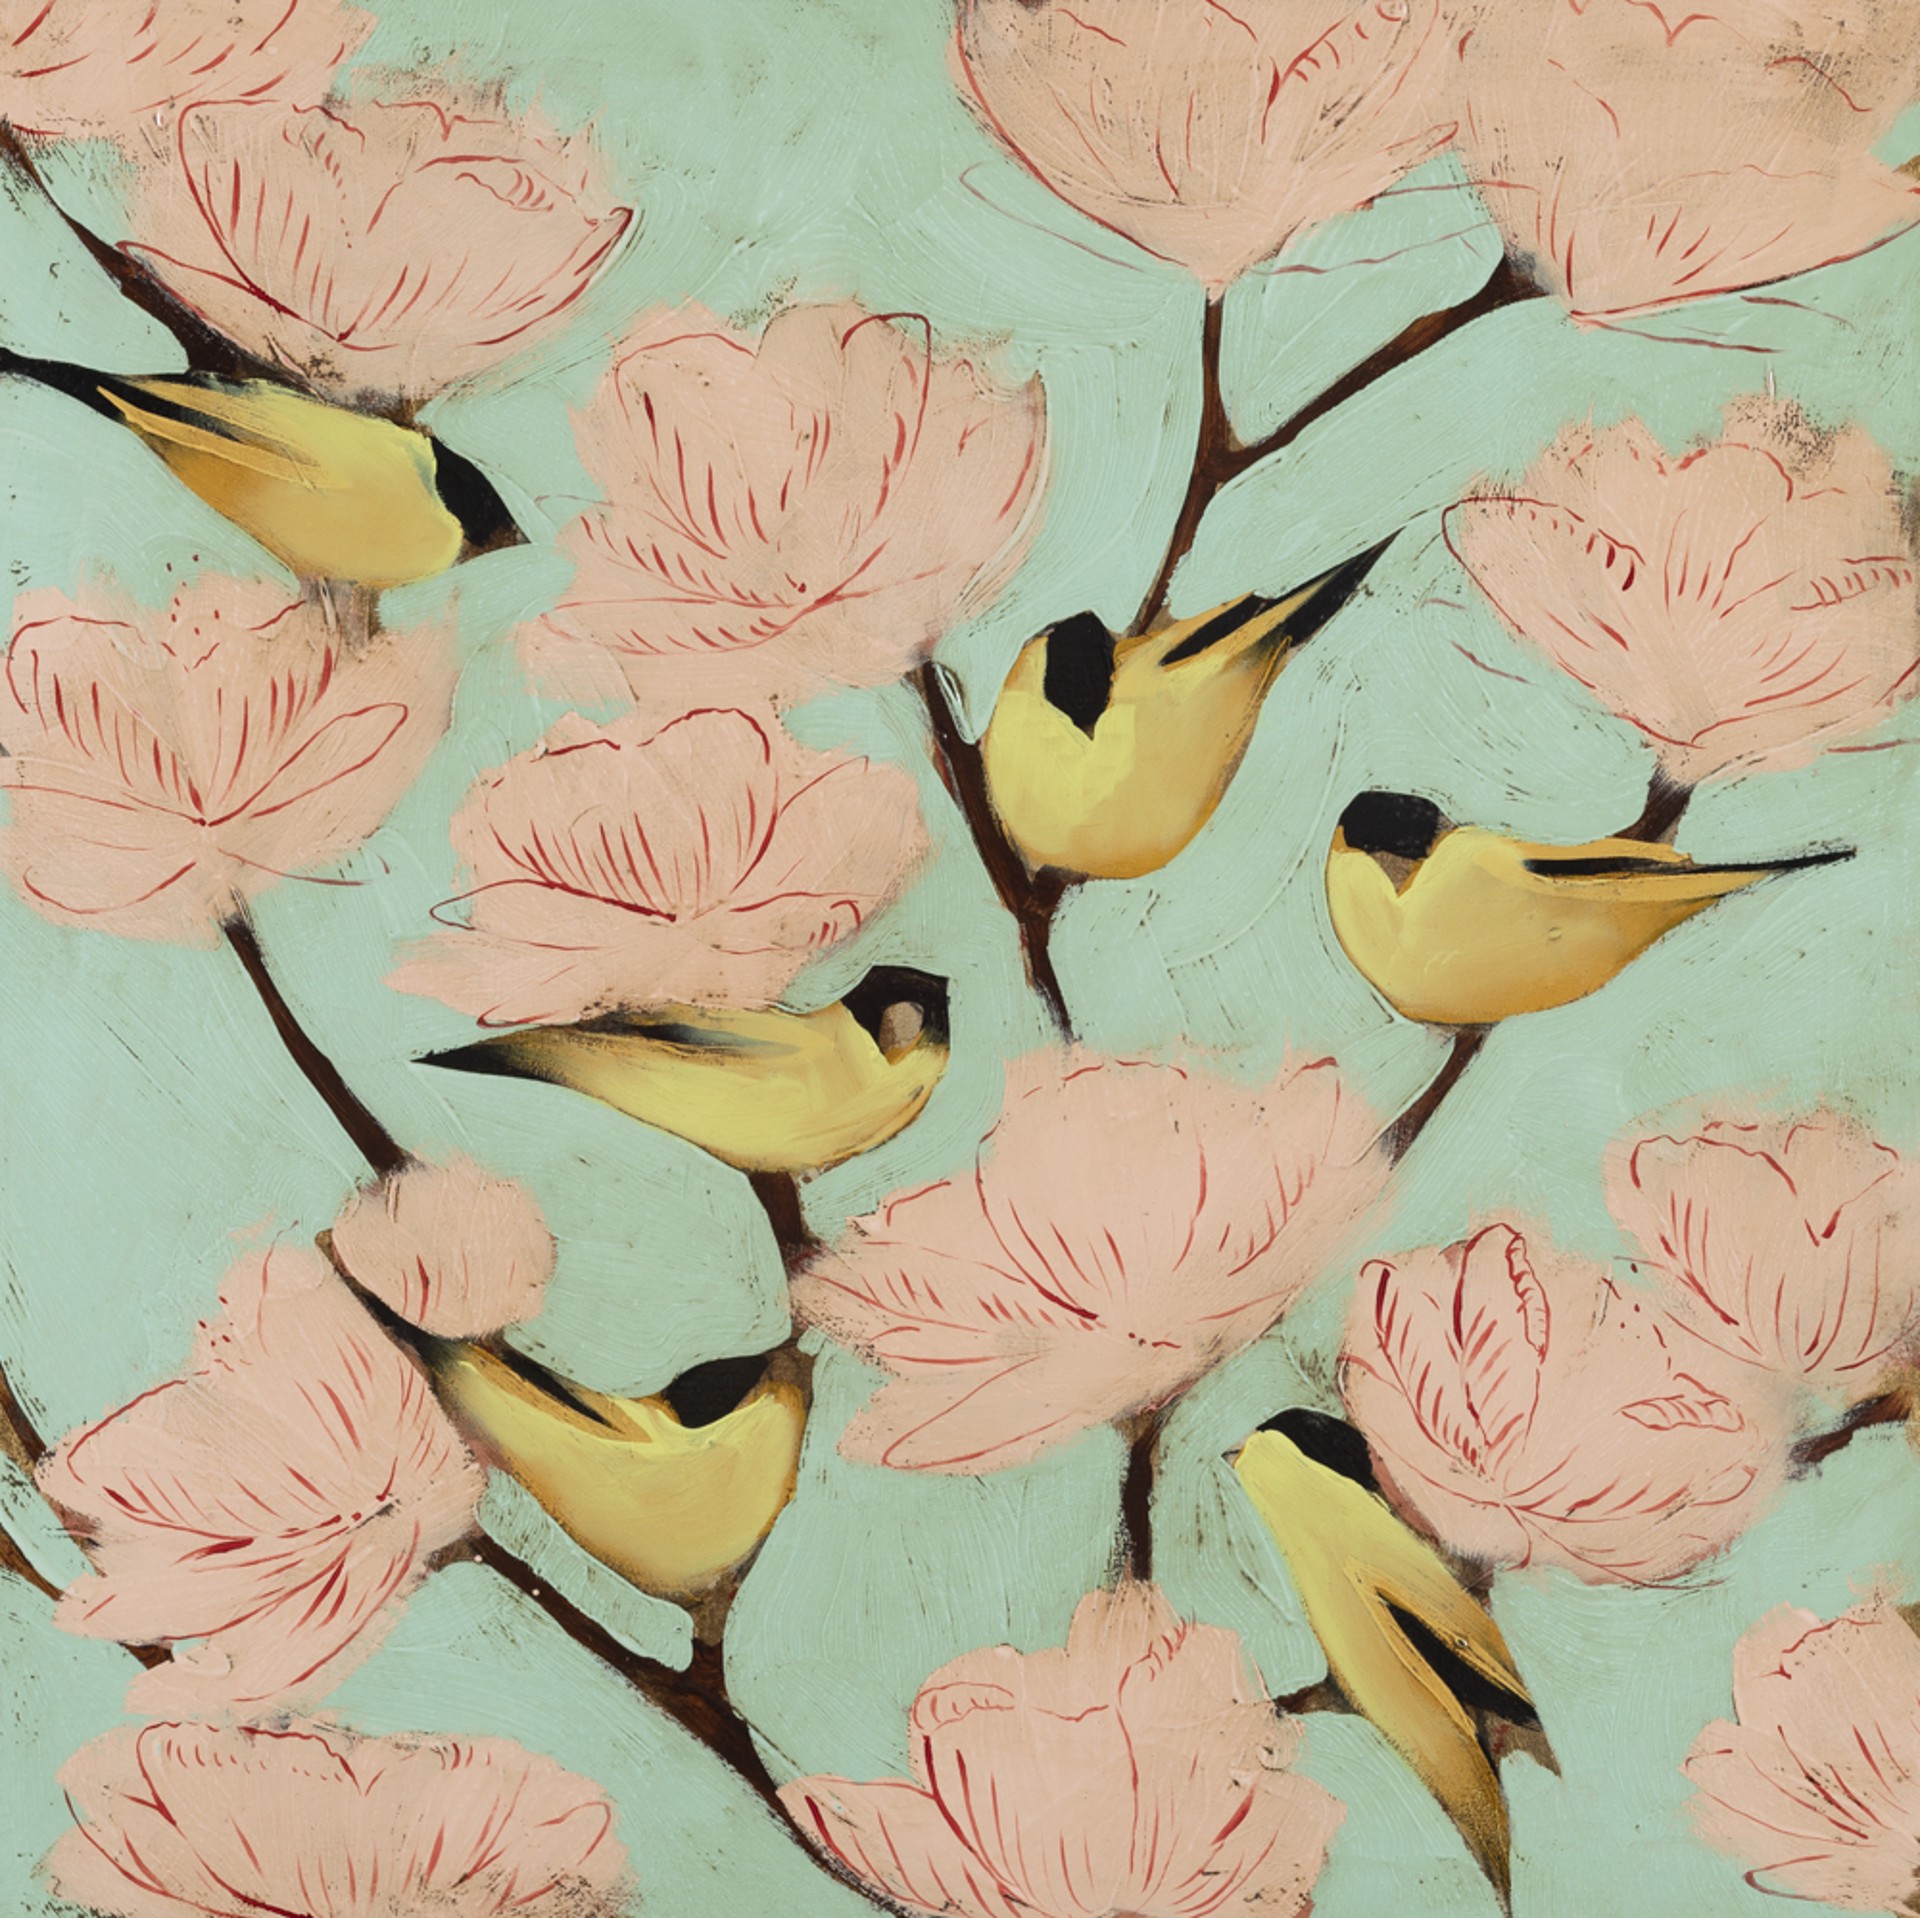 Finches and Blossoms by Joseph Bradley